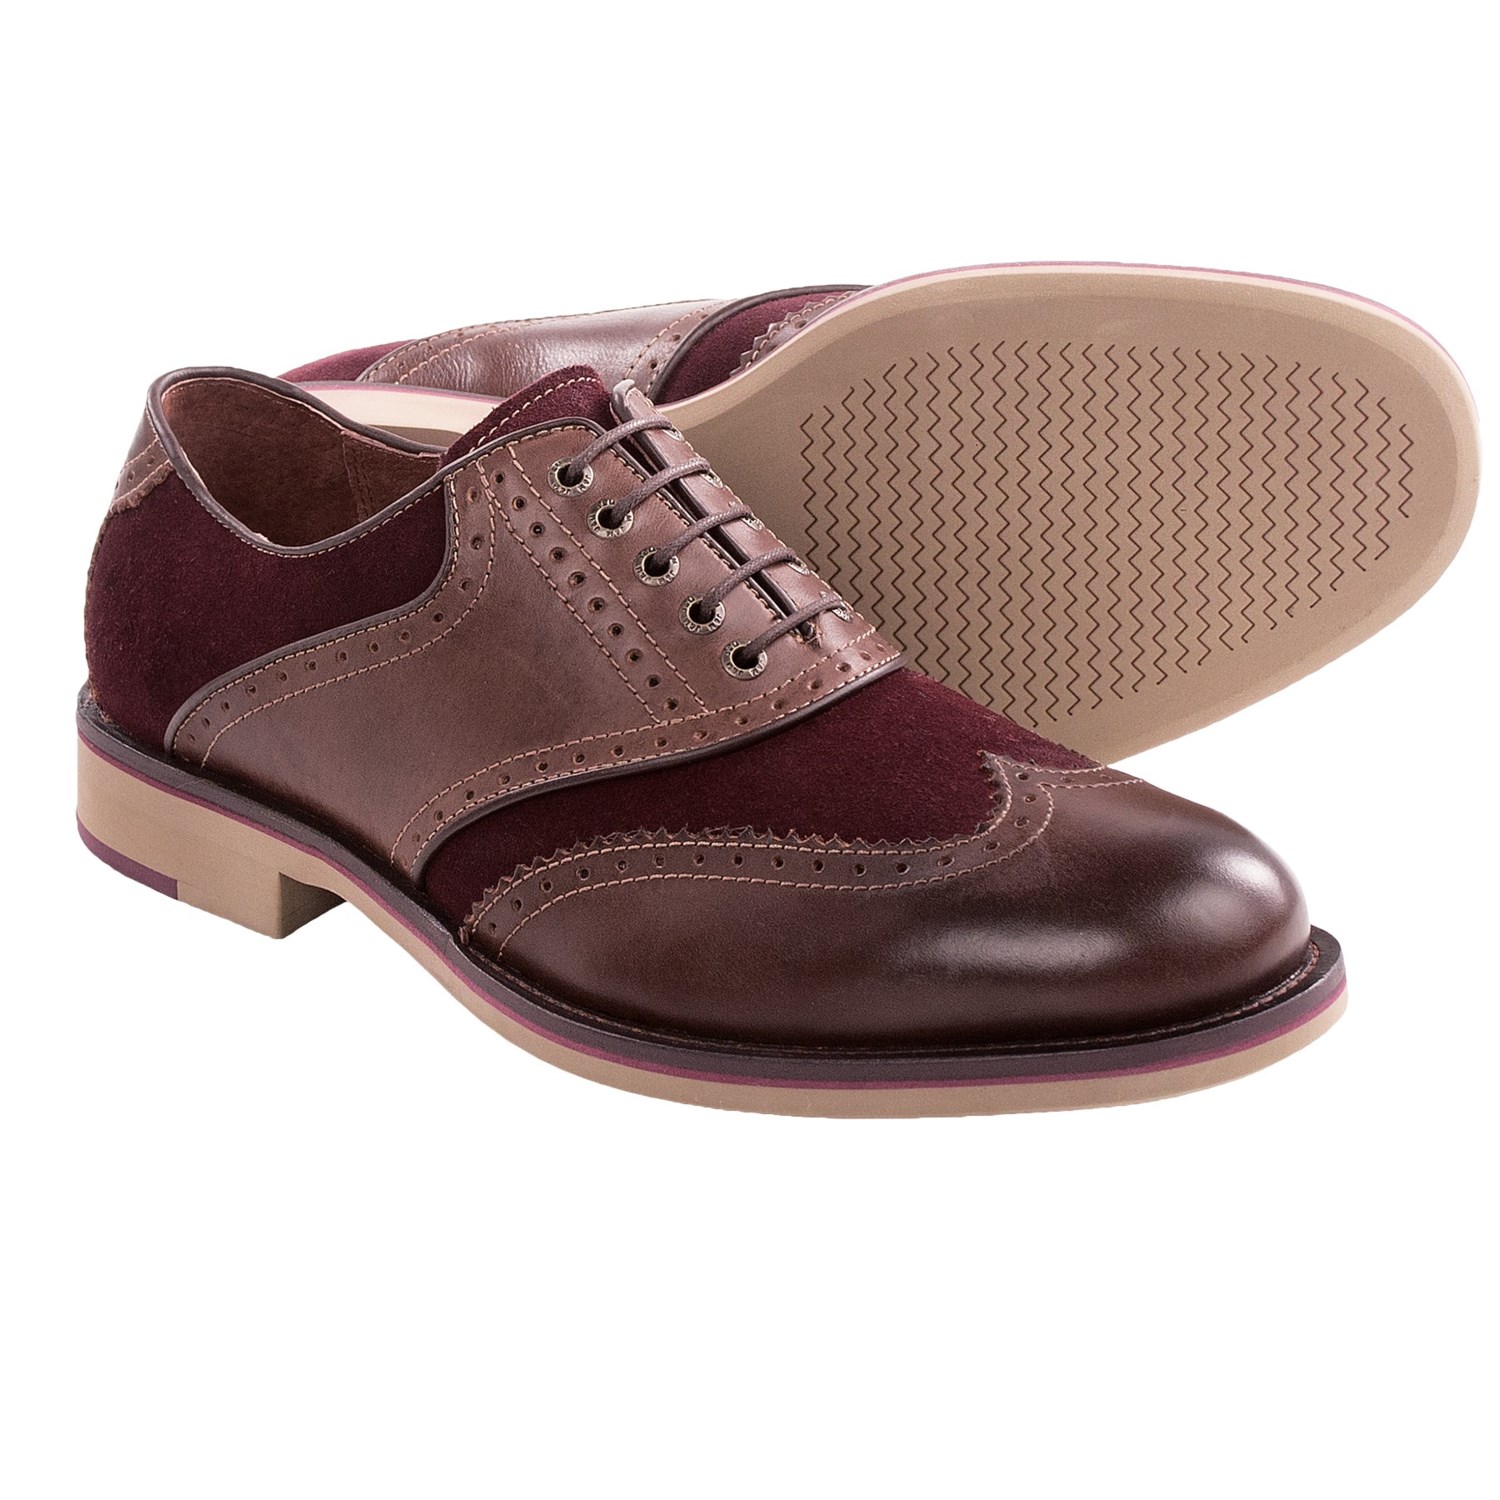 johnston-and-murphy-ellington-oxford-shoes-leather-suede-wingtips-for ...